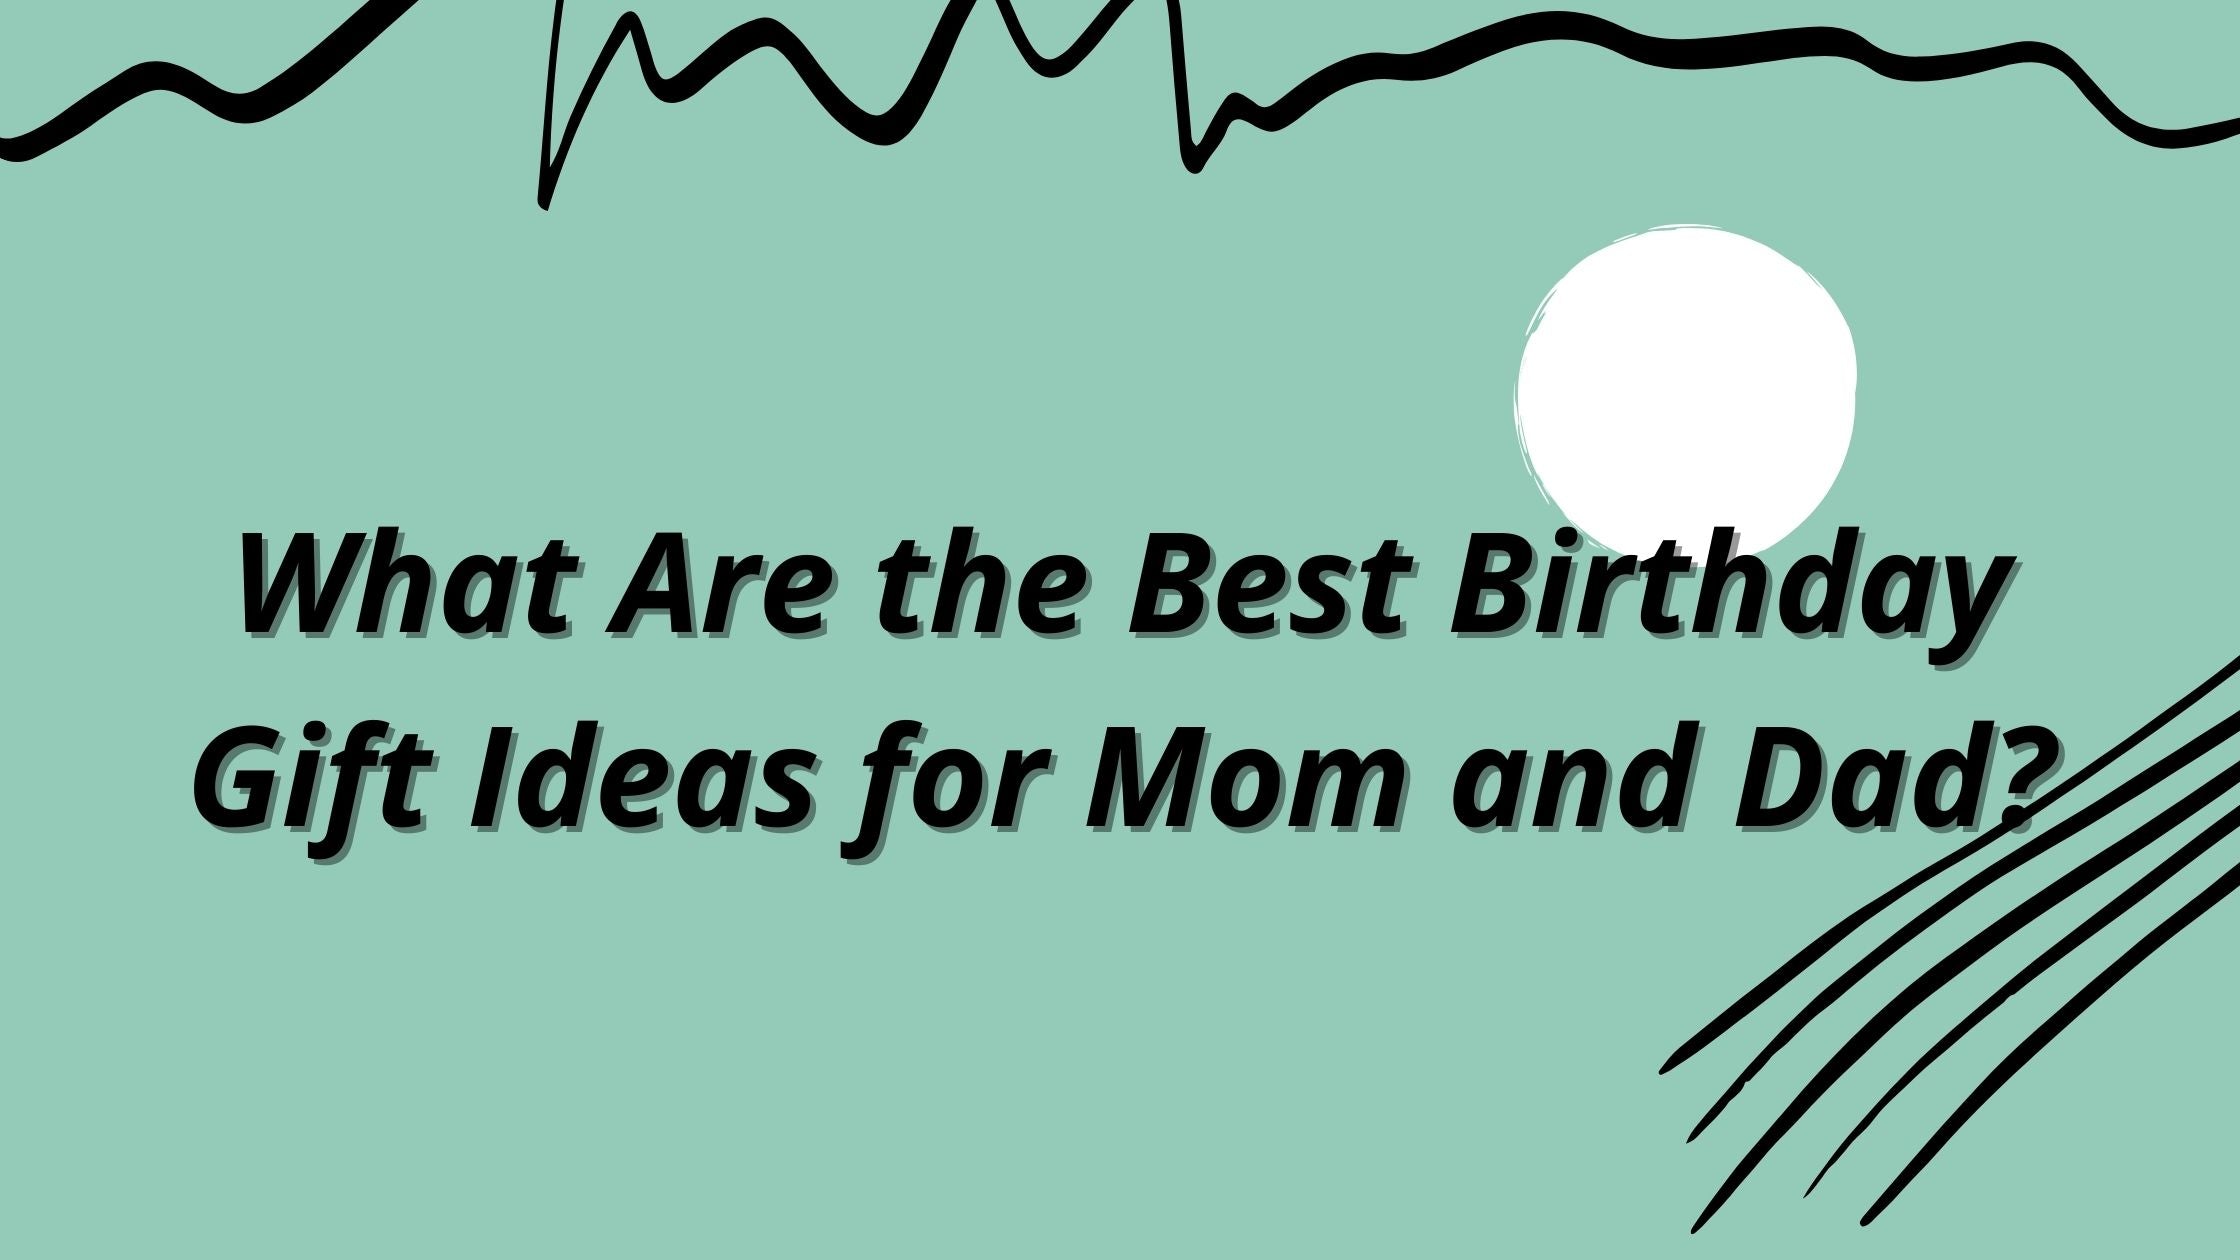 What Are the Best Birthday Gift Ideas for Mom and Dad?